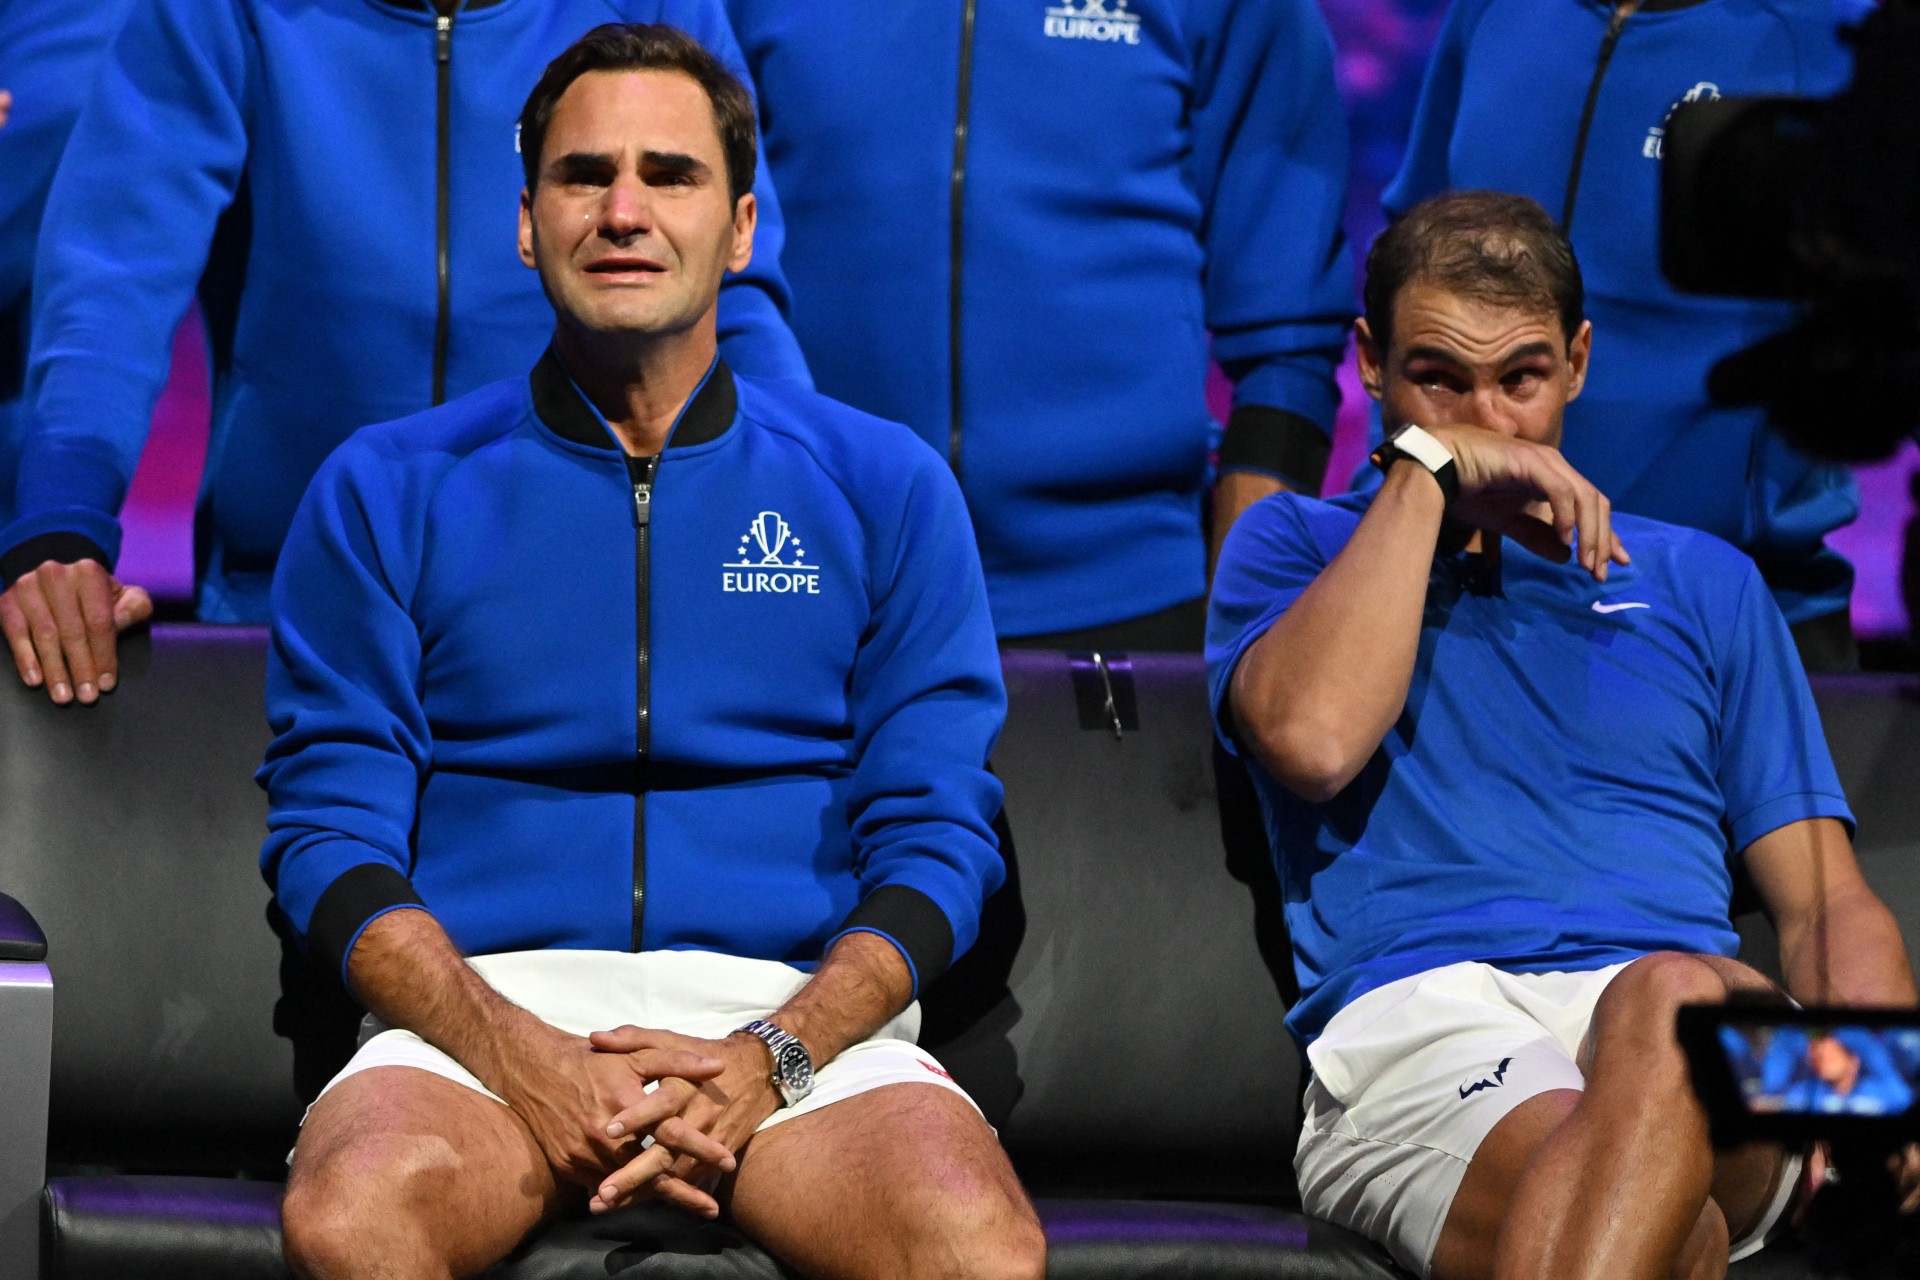 Roger Federer and Rafael Nadal cheer during the Swiss's last professional match at the Laver Cup on September 24, 2022 in London.